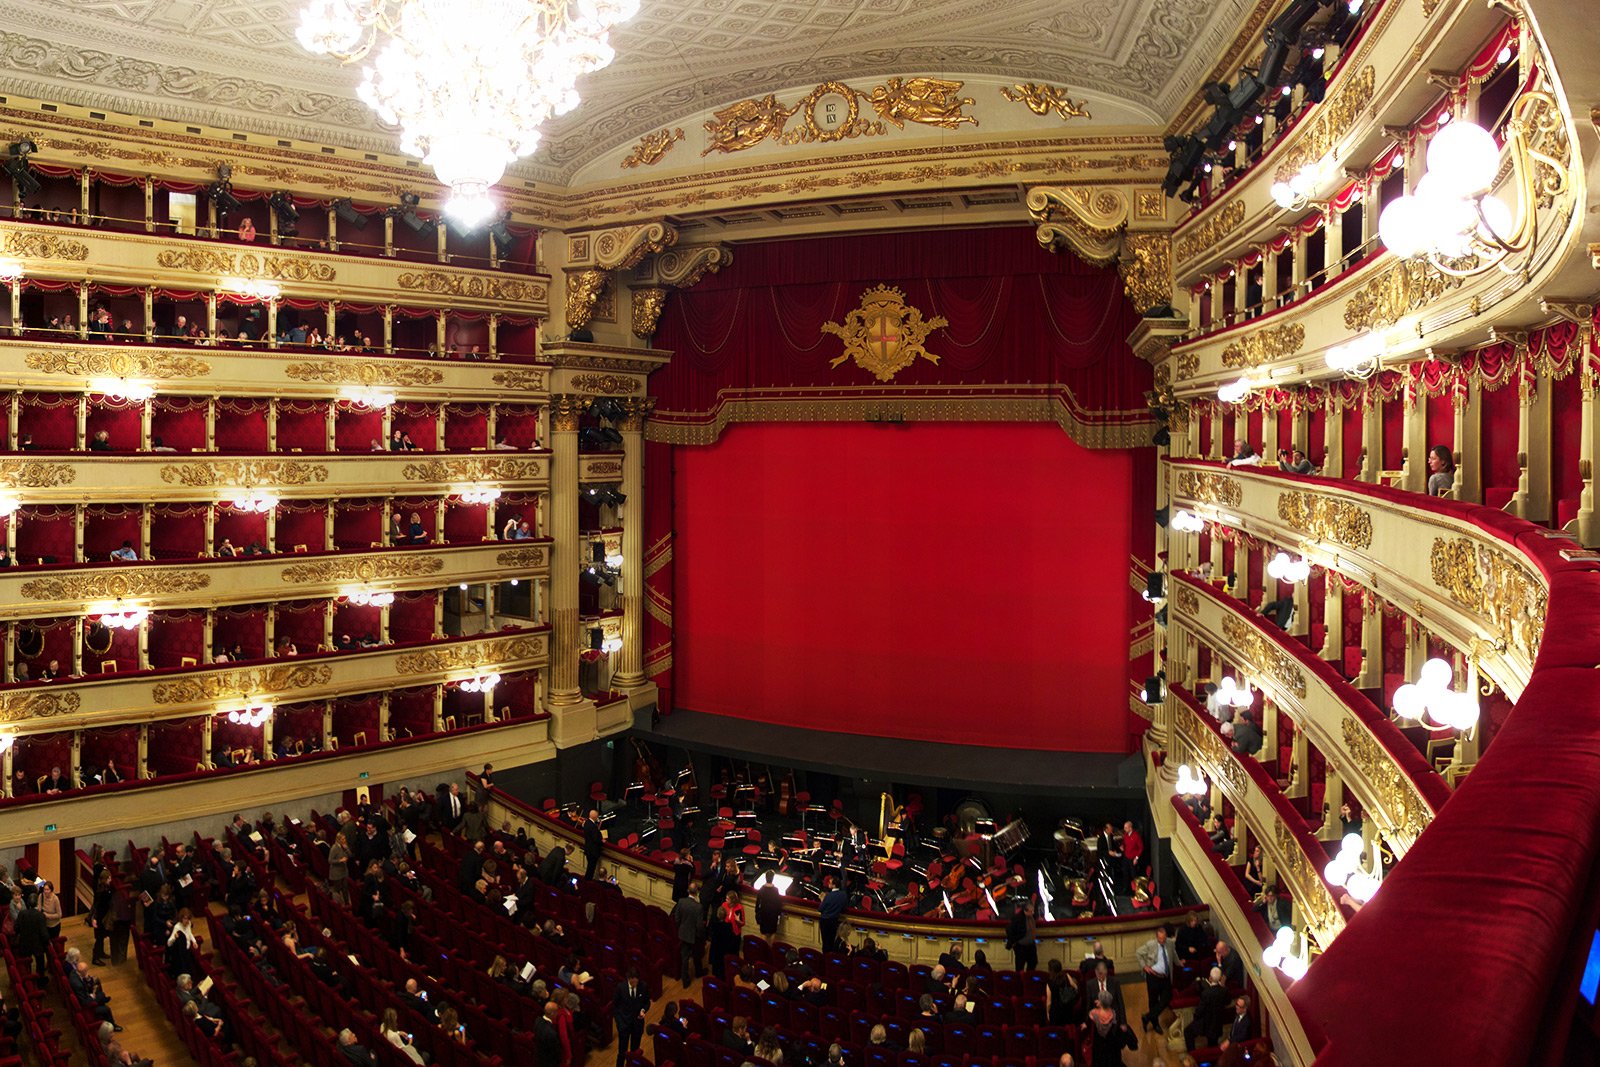 How to listen to opera at La Scala in Milan